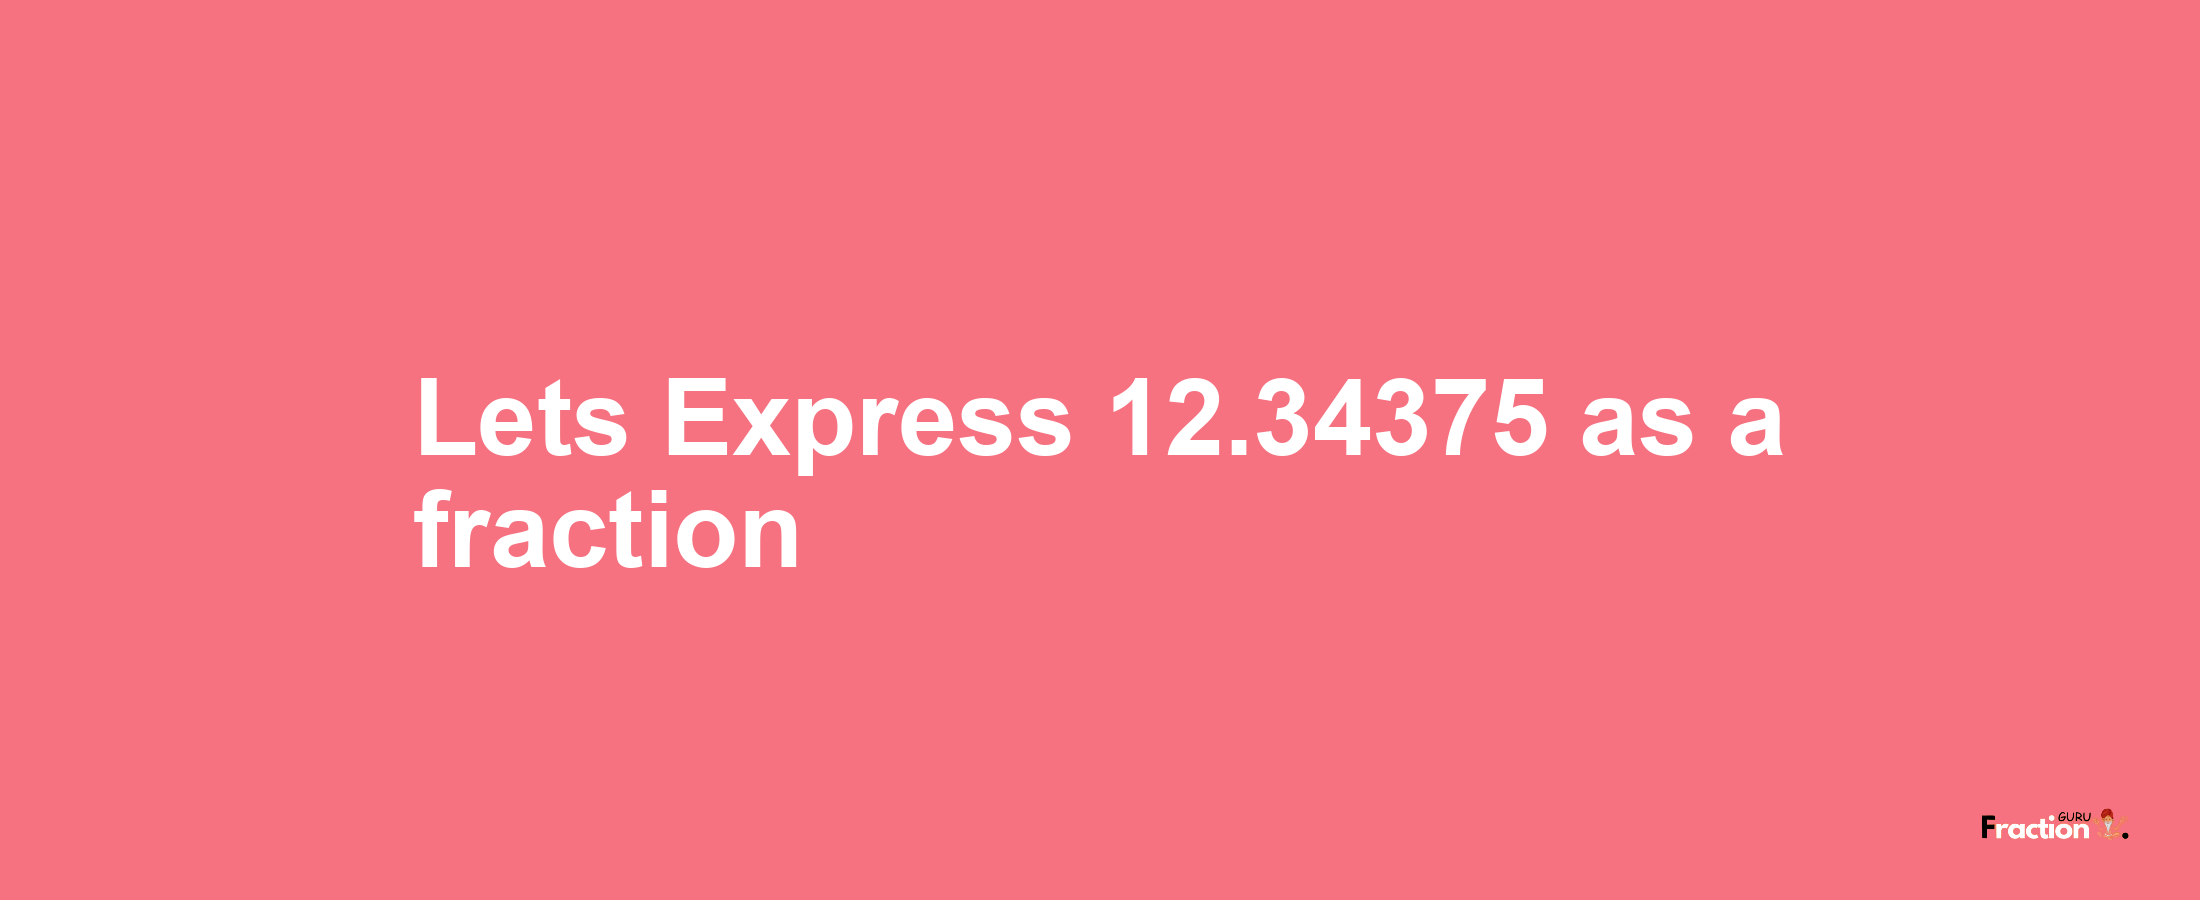 Lets Express 12.34375 as afraction